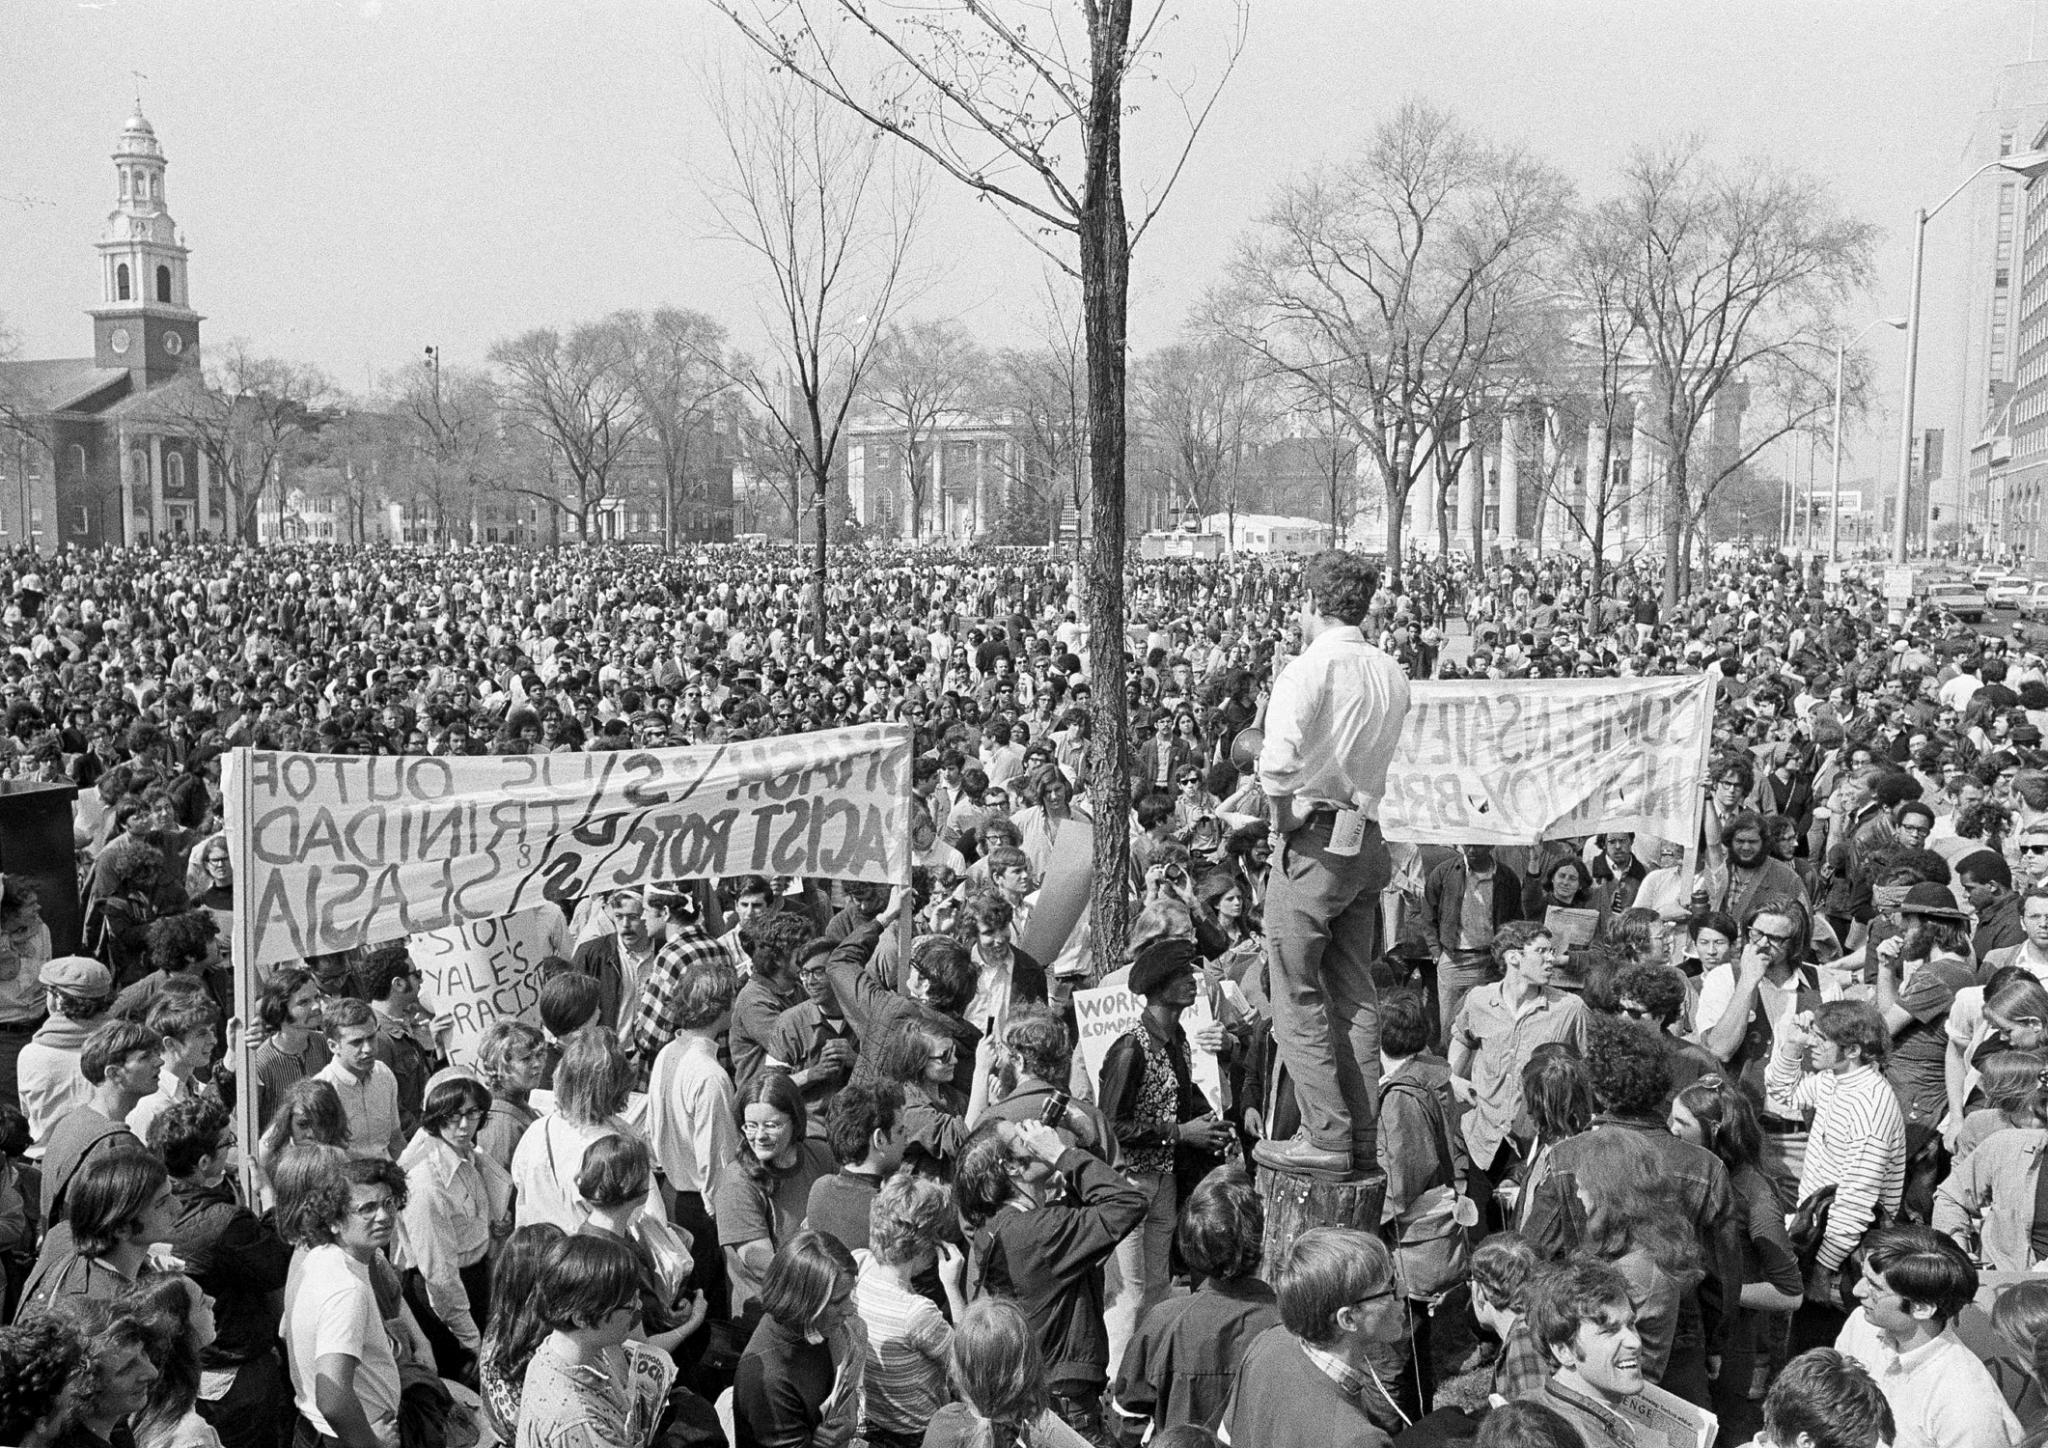 21 Notable Moments of Social Unrest That Shaped Black History
